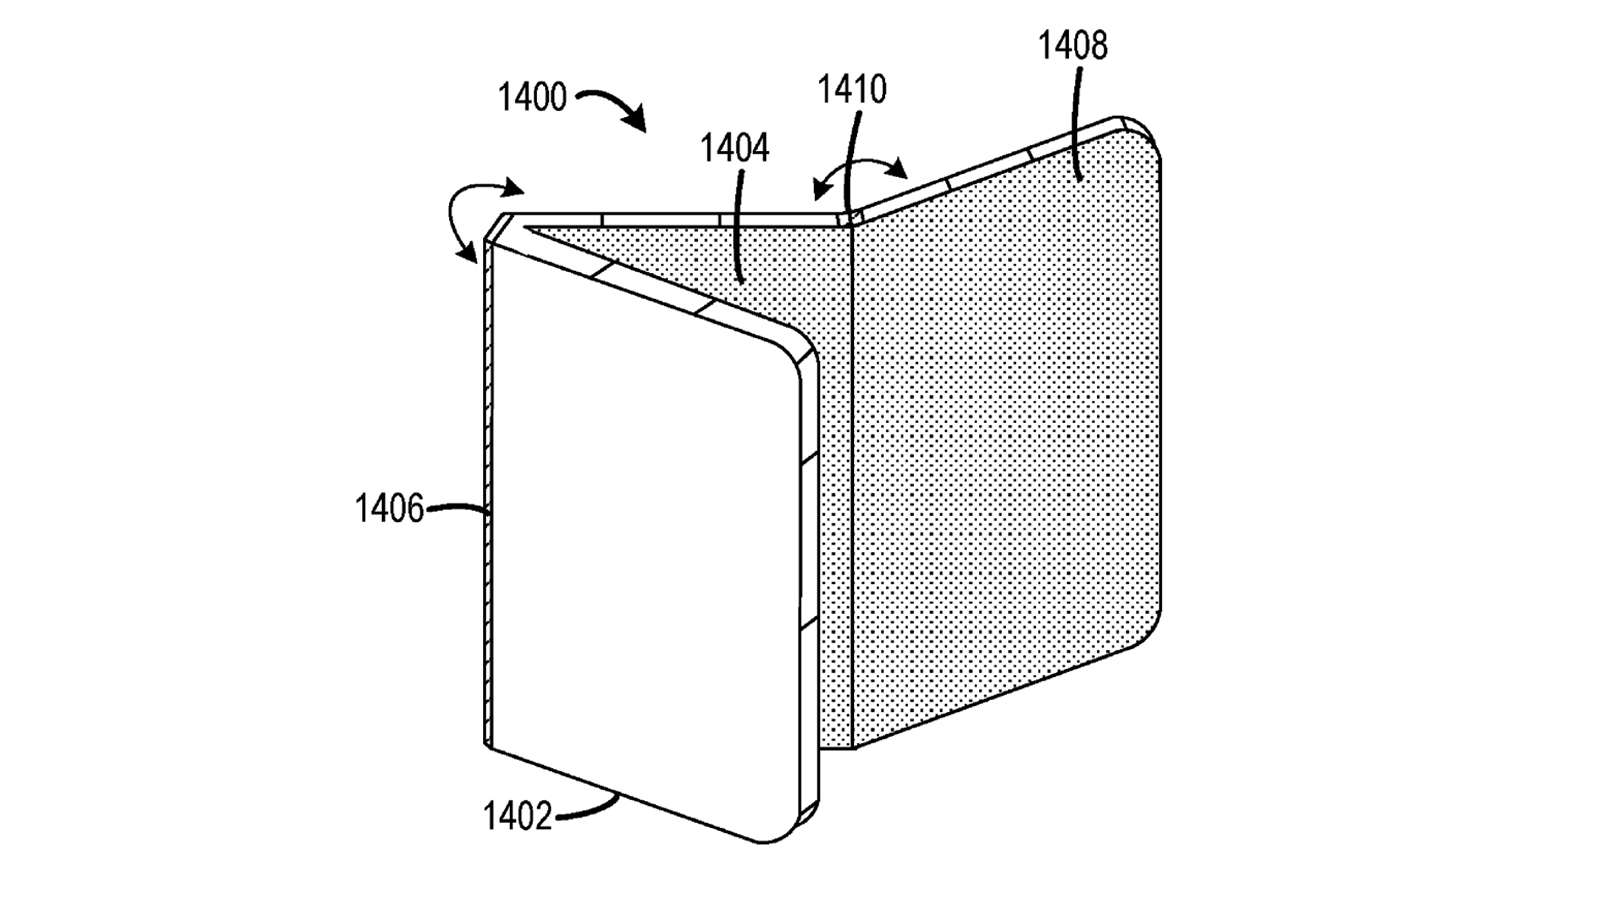 A patent design for a Microsoft folding tablet concept